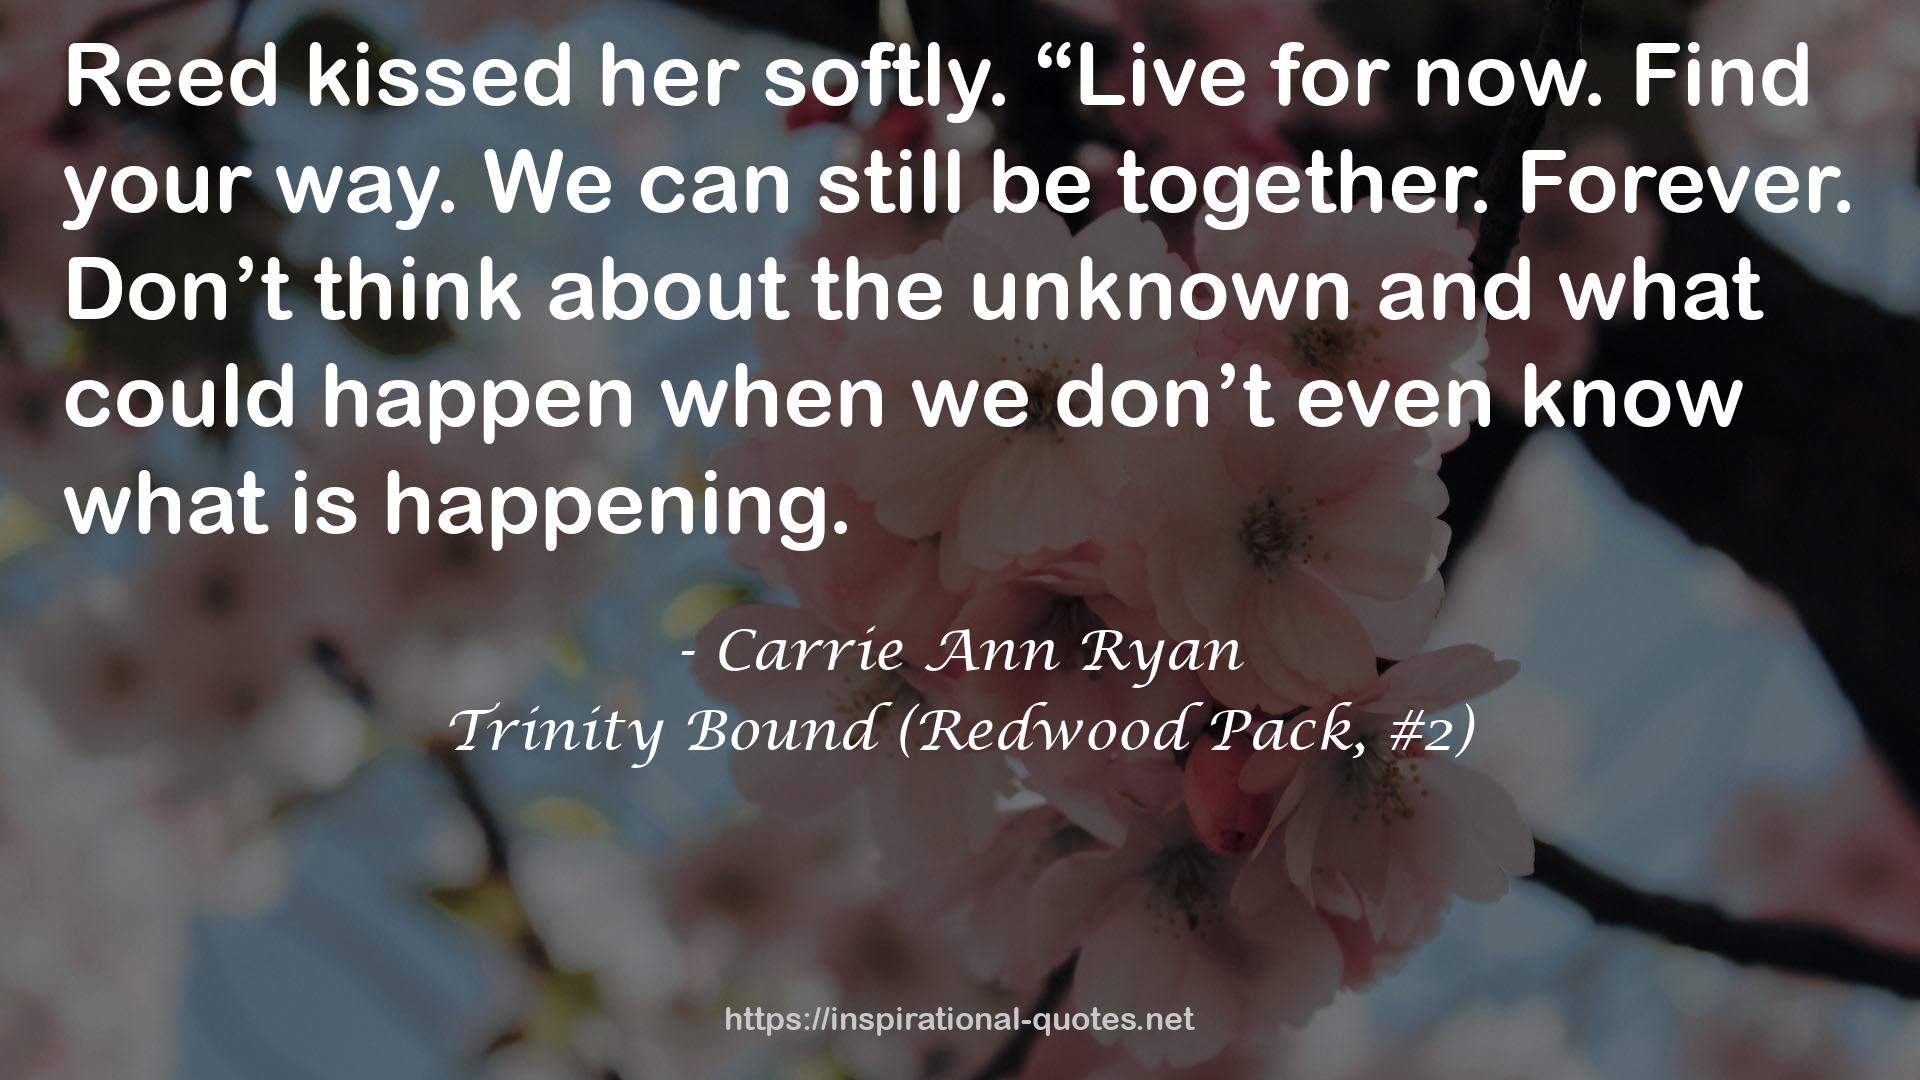 Trinity Bound (Redwood Pack, #2) QUOTES